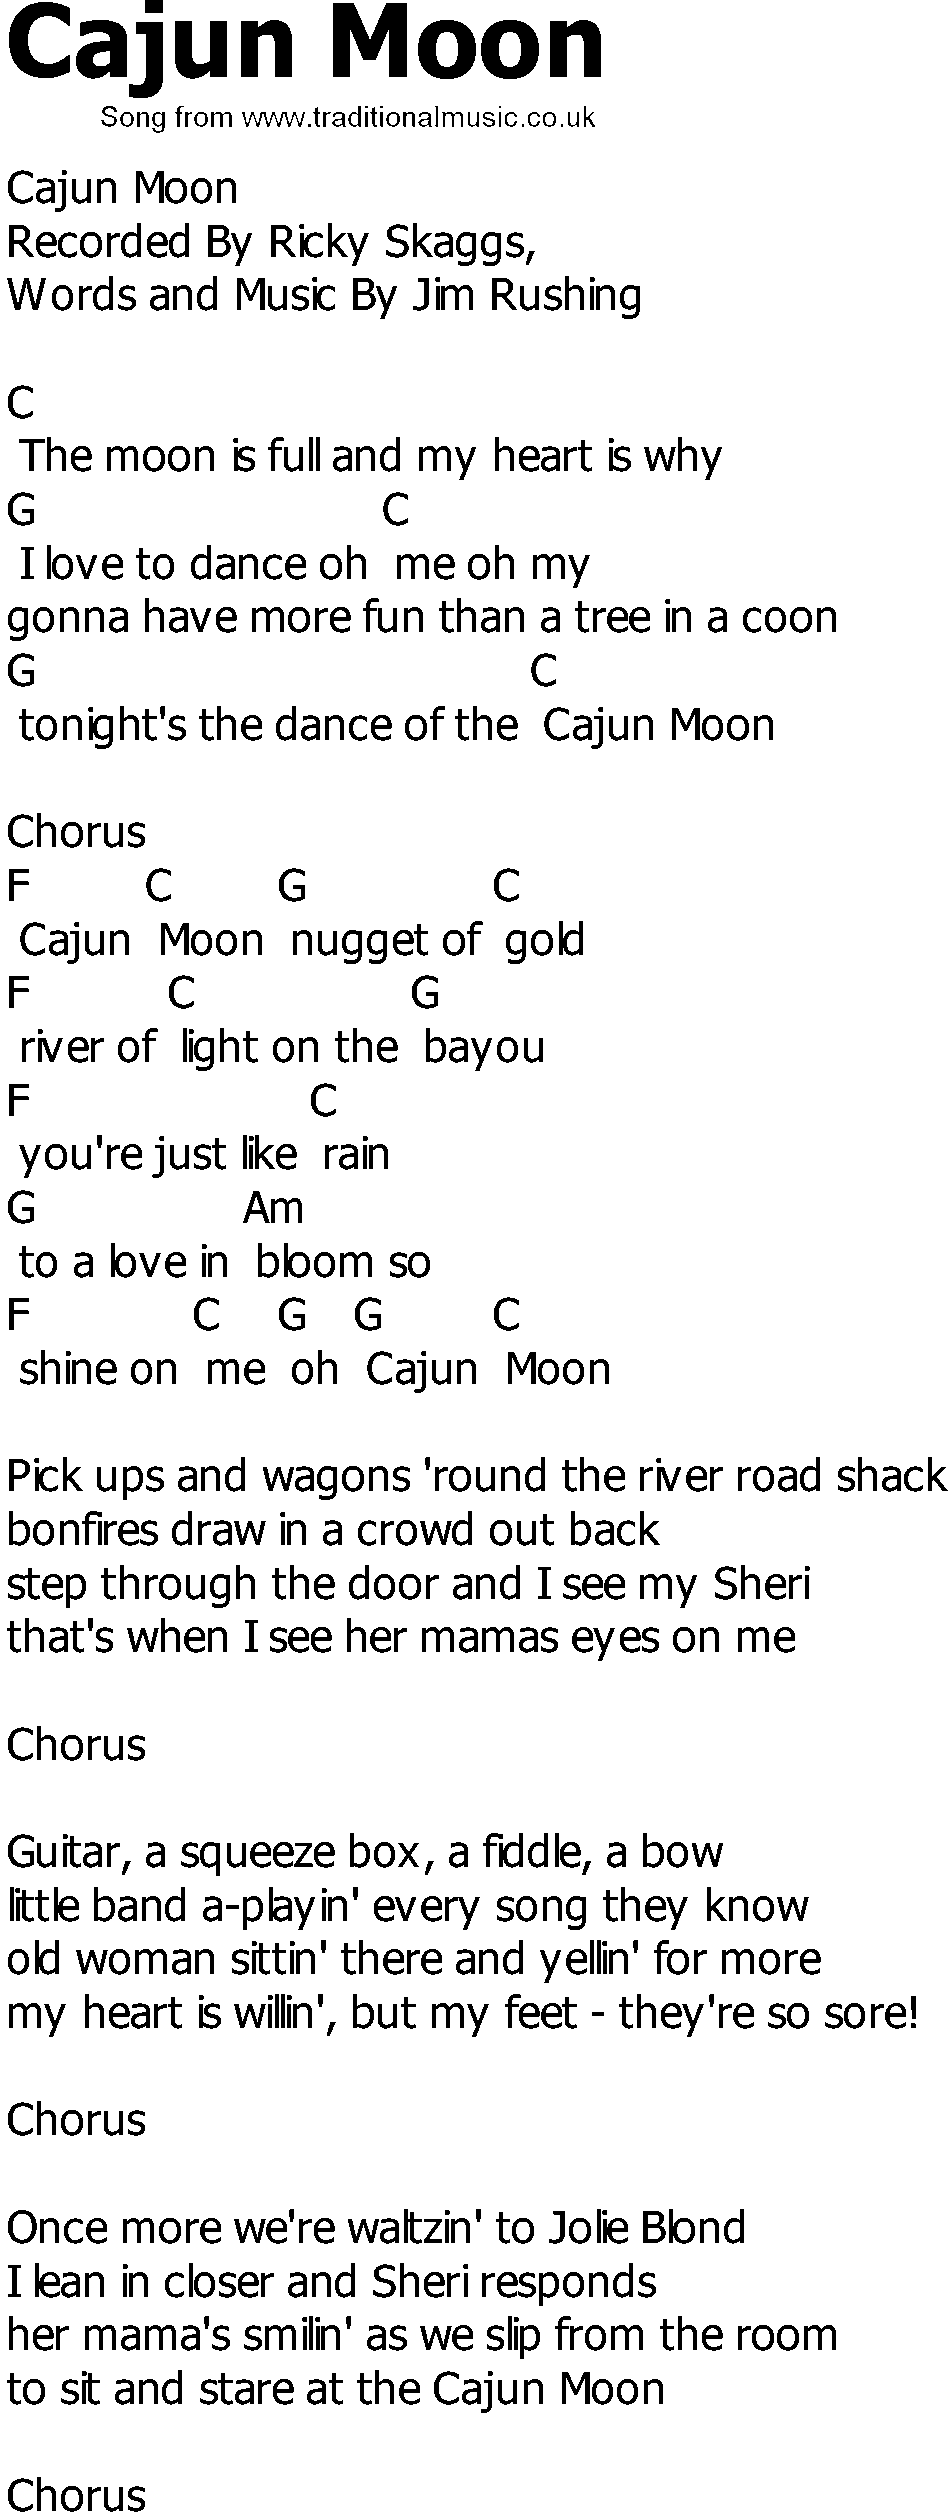 Old Country song lyrics with chords - Cajun Moon